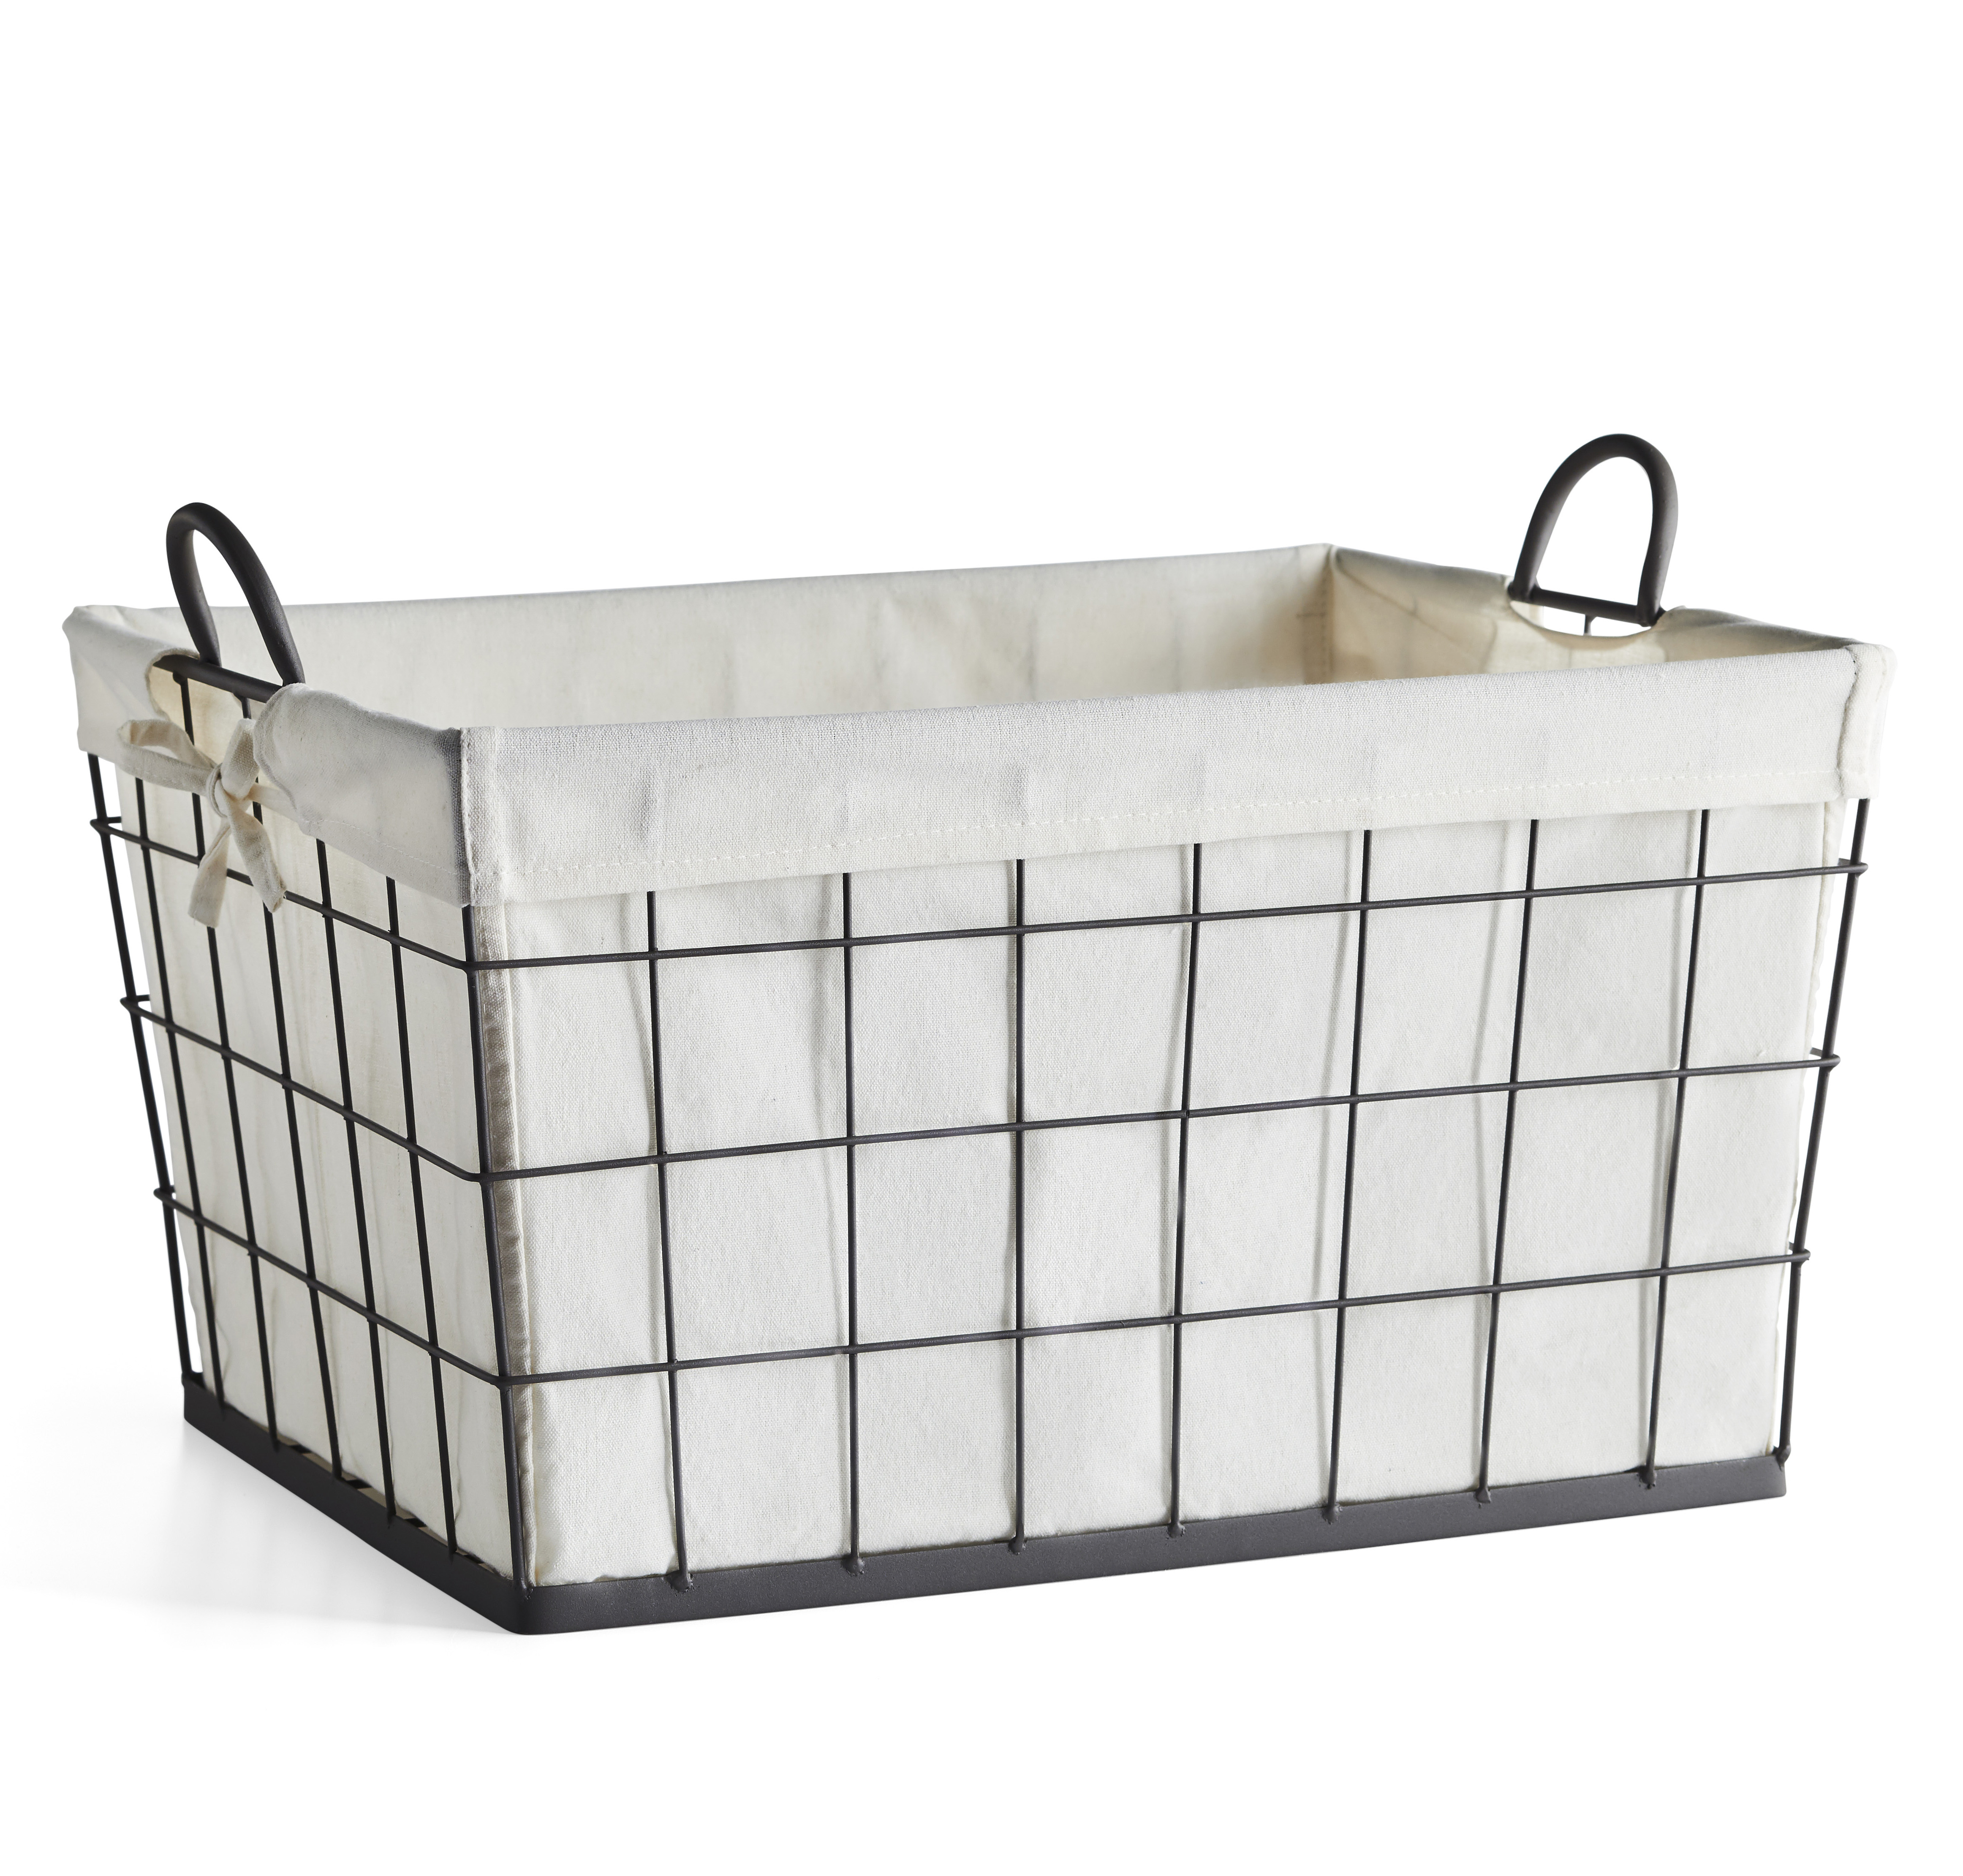 Better Homes & Gardens Heavy-Gauge Wire Laundry Basket, Antique Gray for Adult Use - image 1 of 10